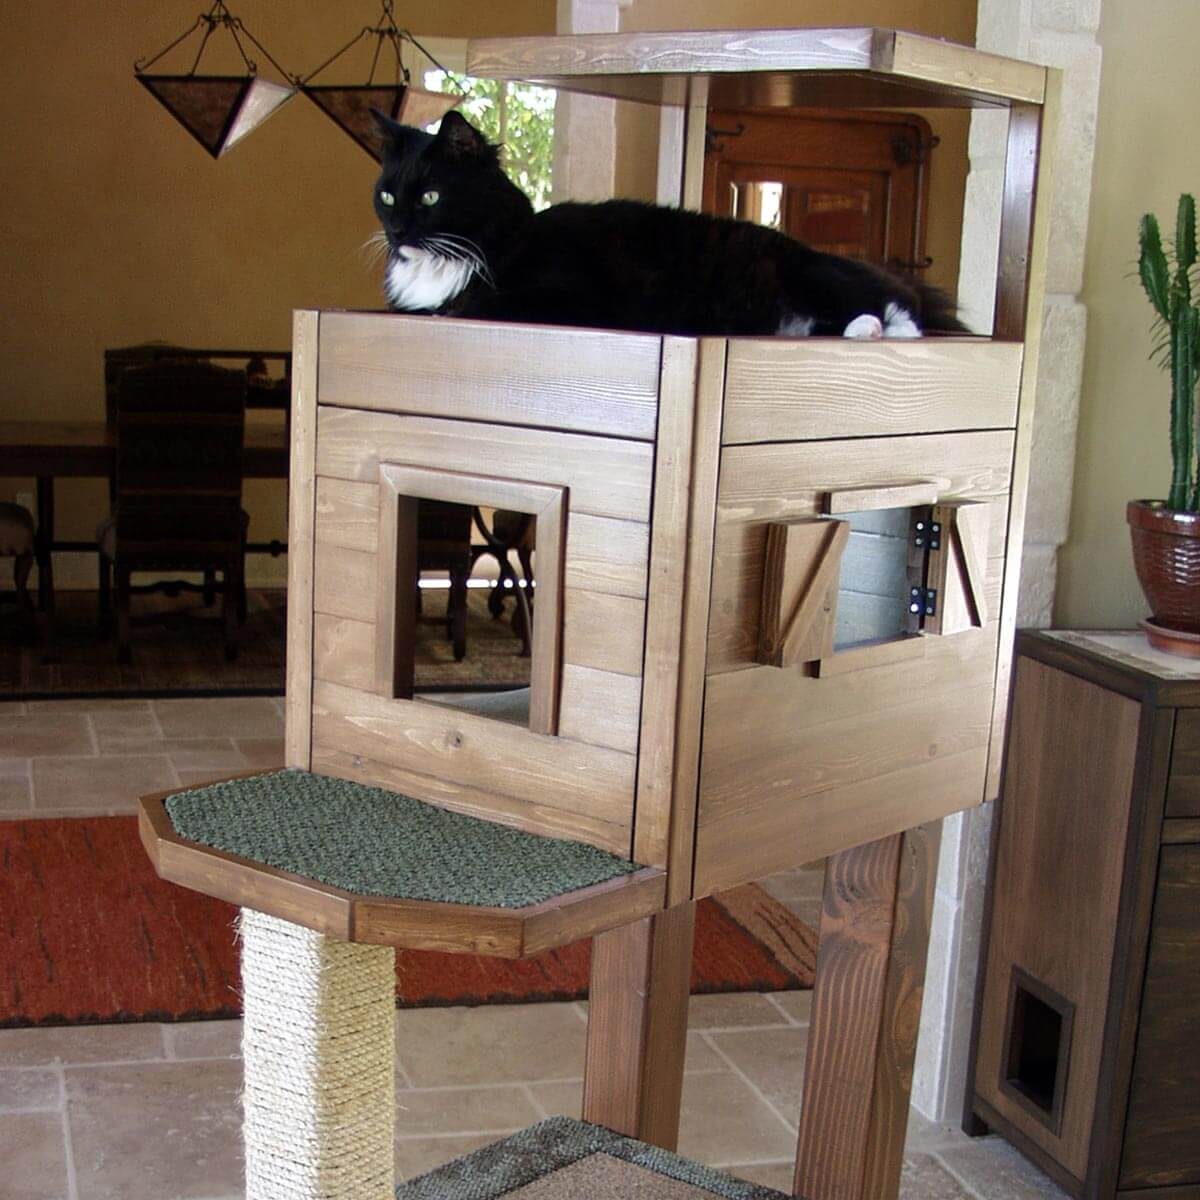 ultimate cat tree house